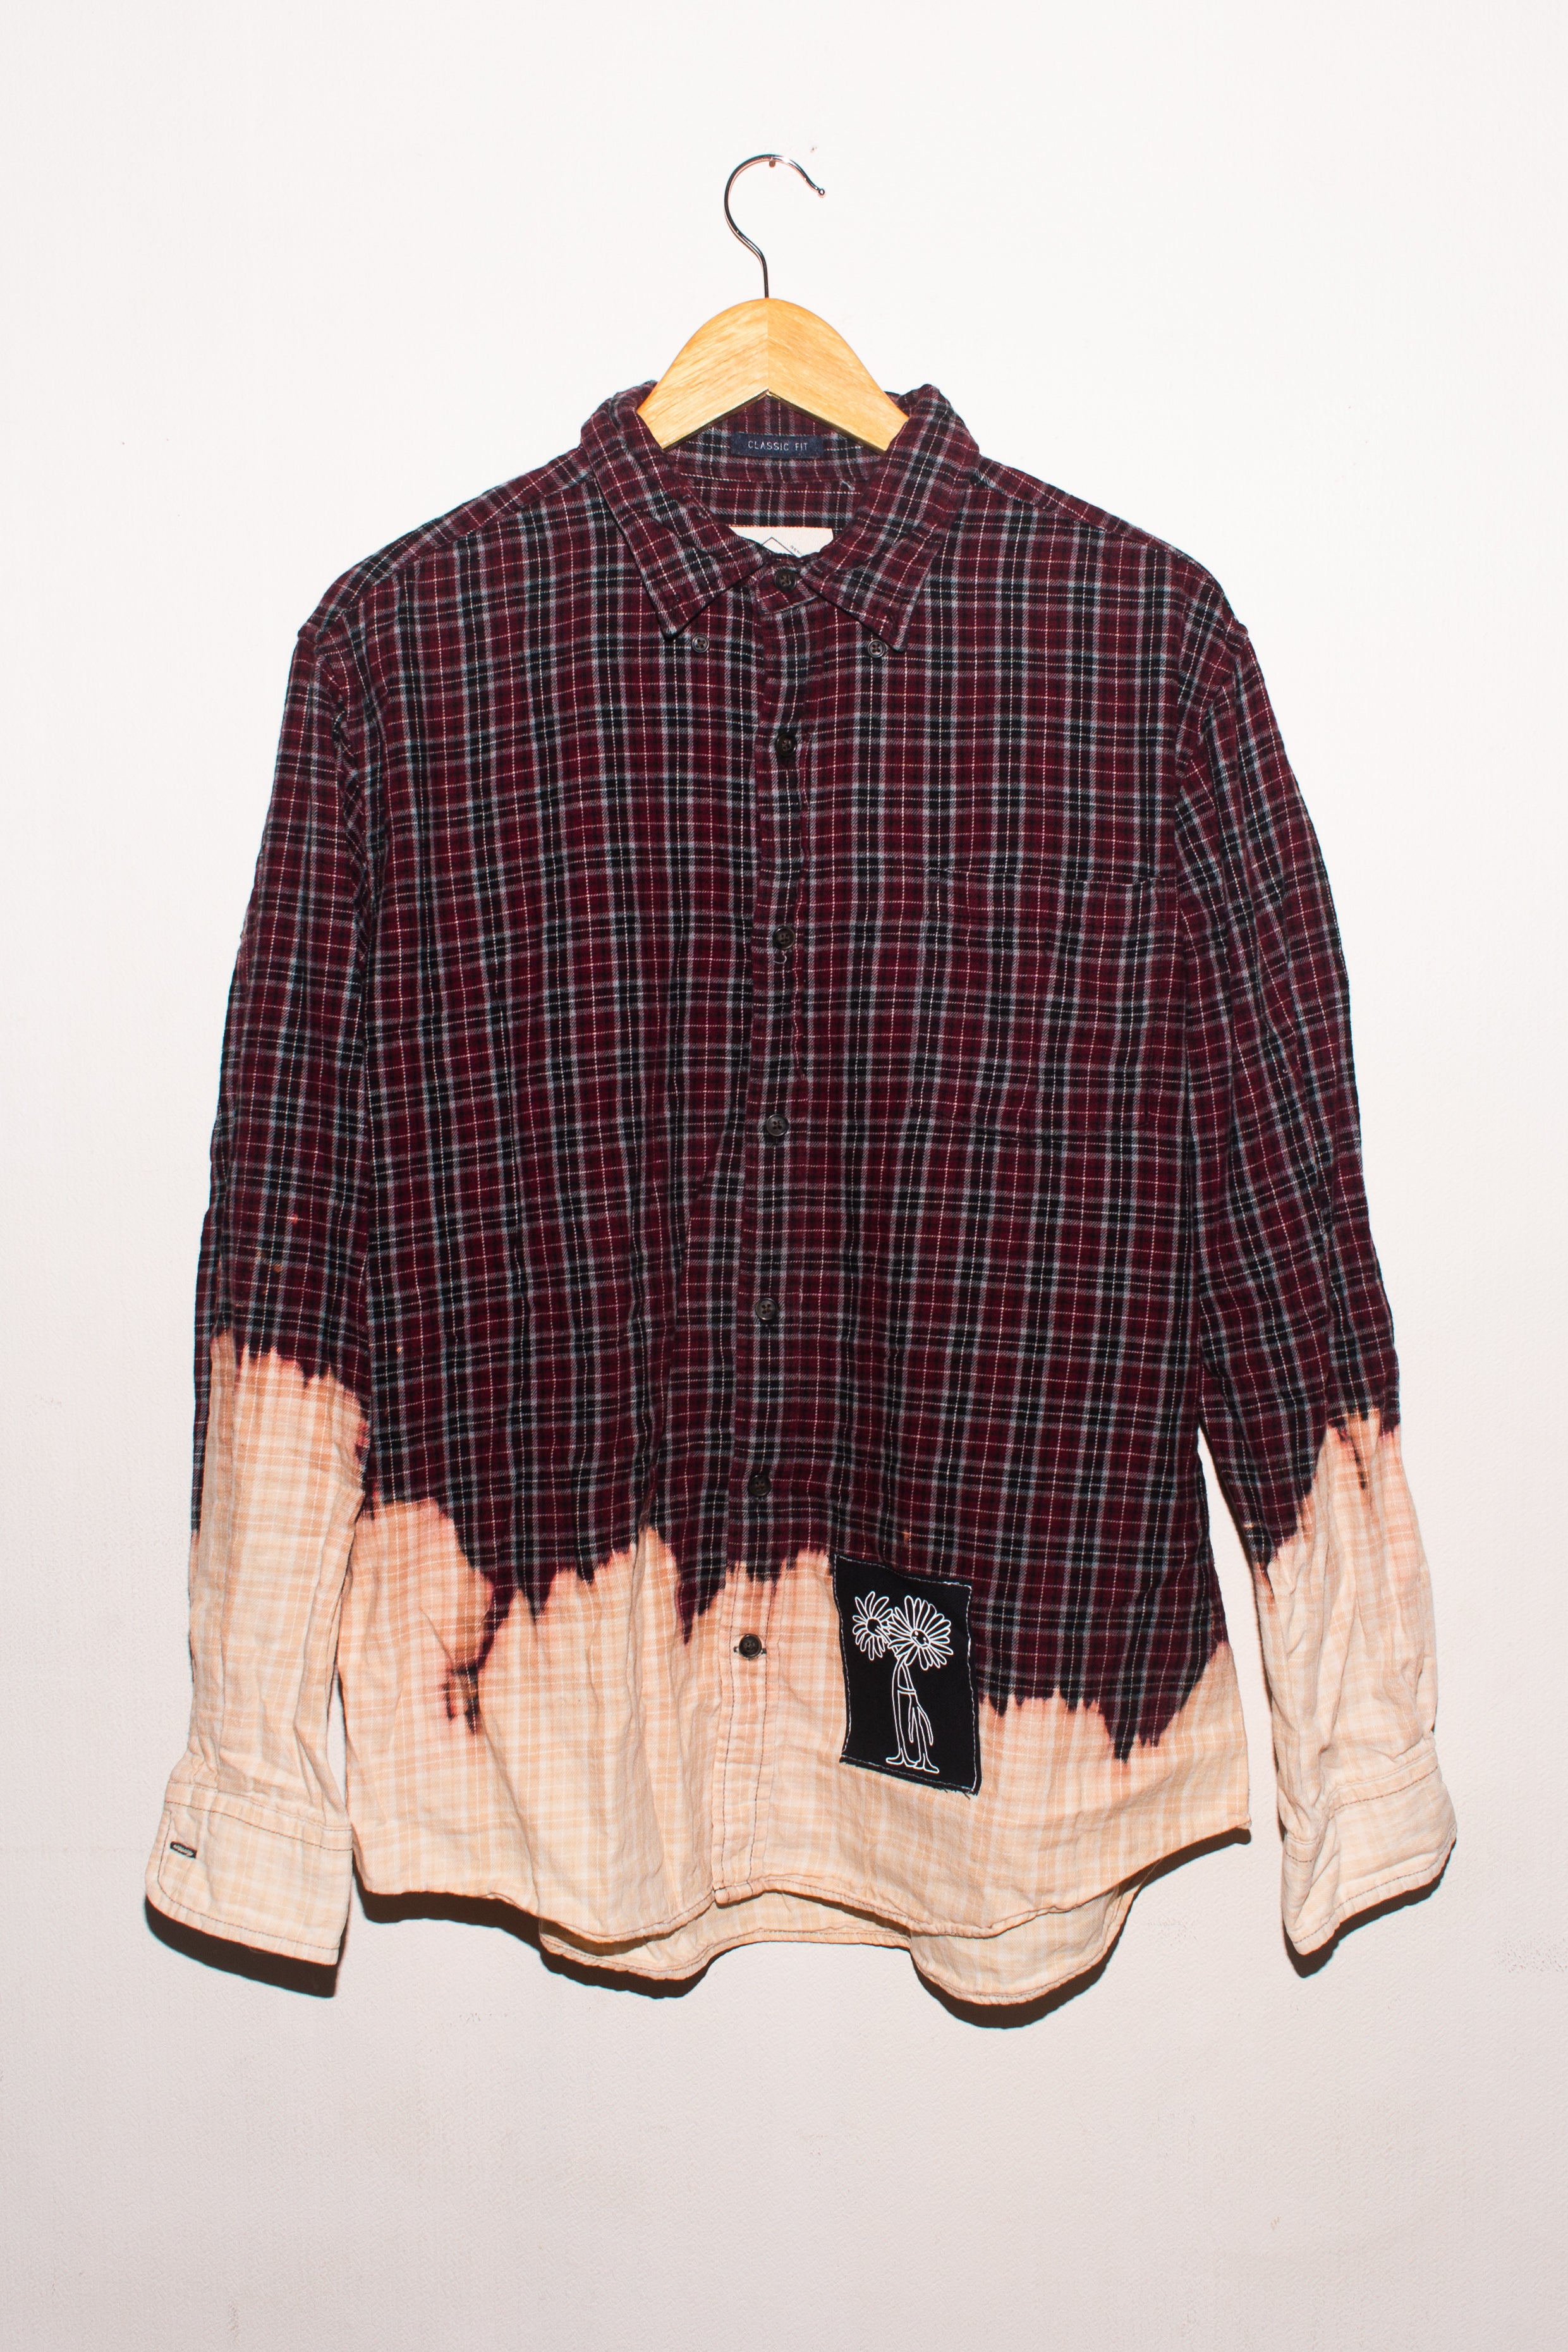 St Johns Bay flannel